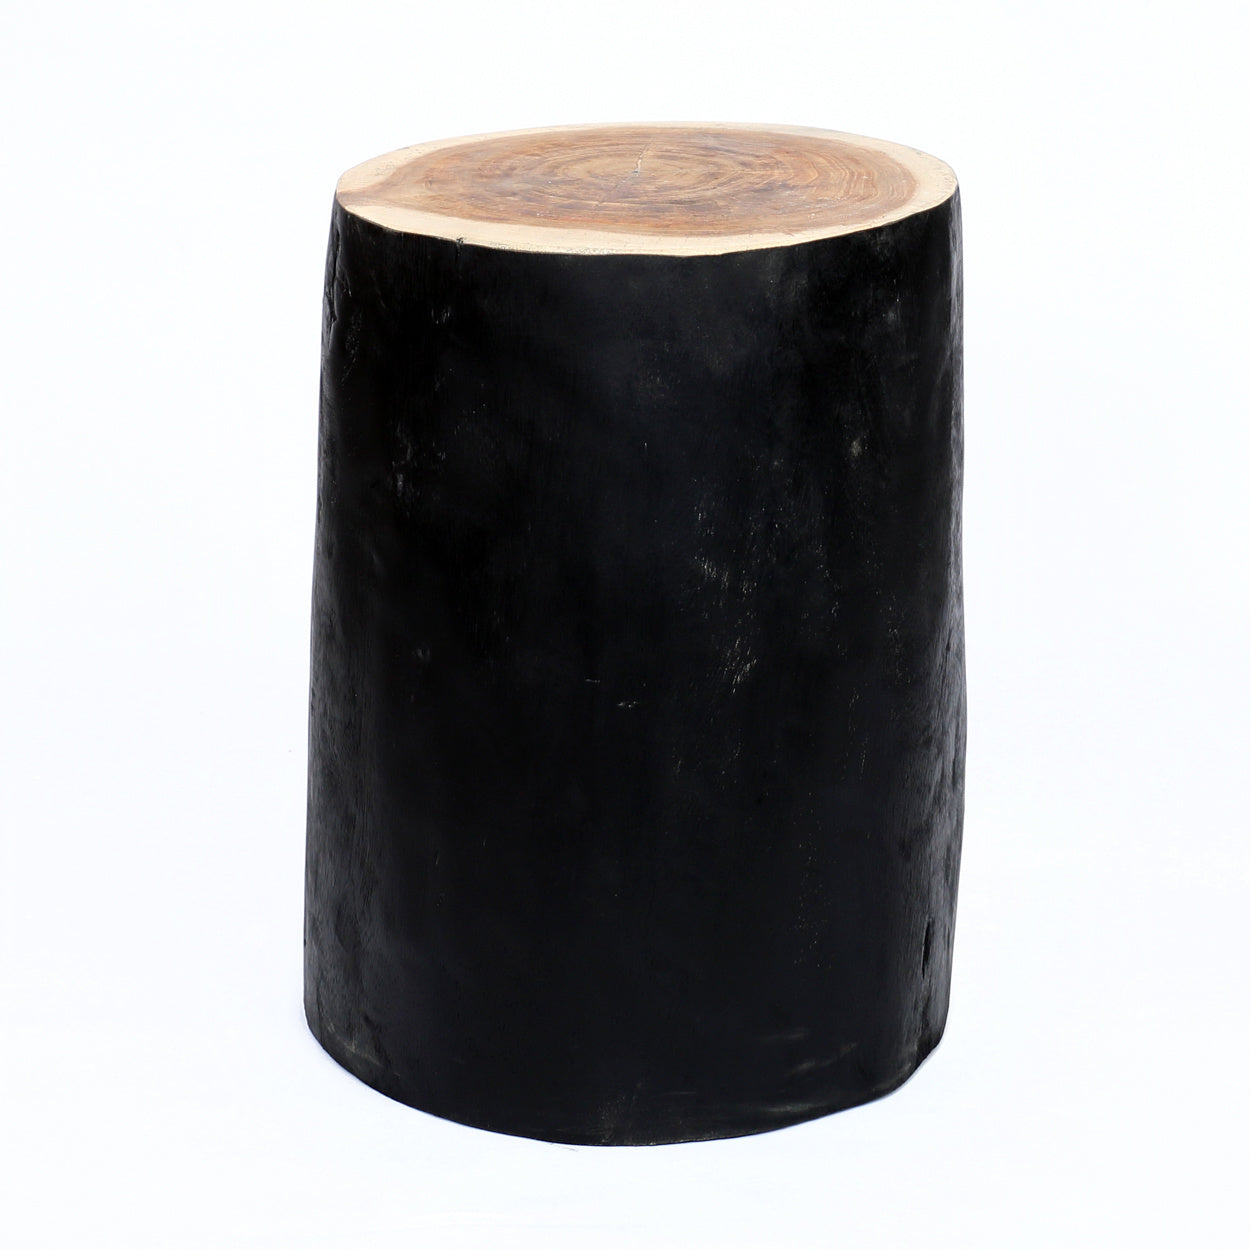 THE TRIBE Stool Natural Black